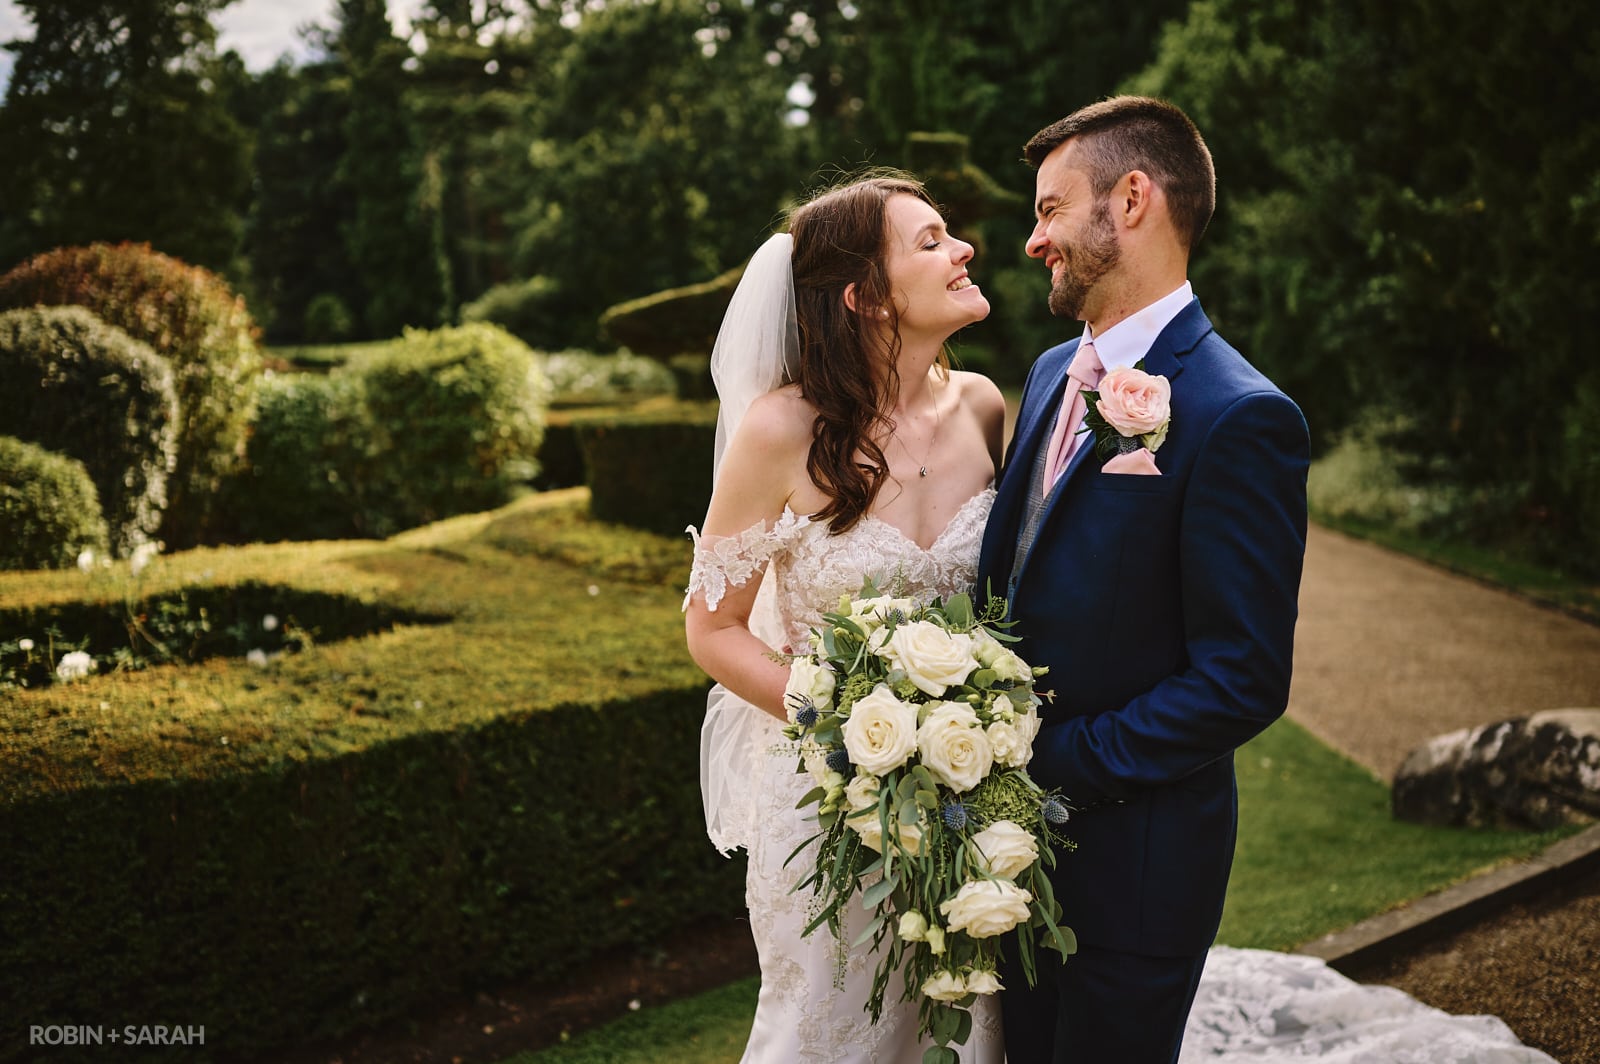 Bride and groom laughing together in topiary garden